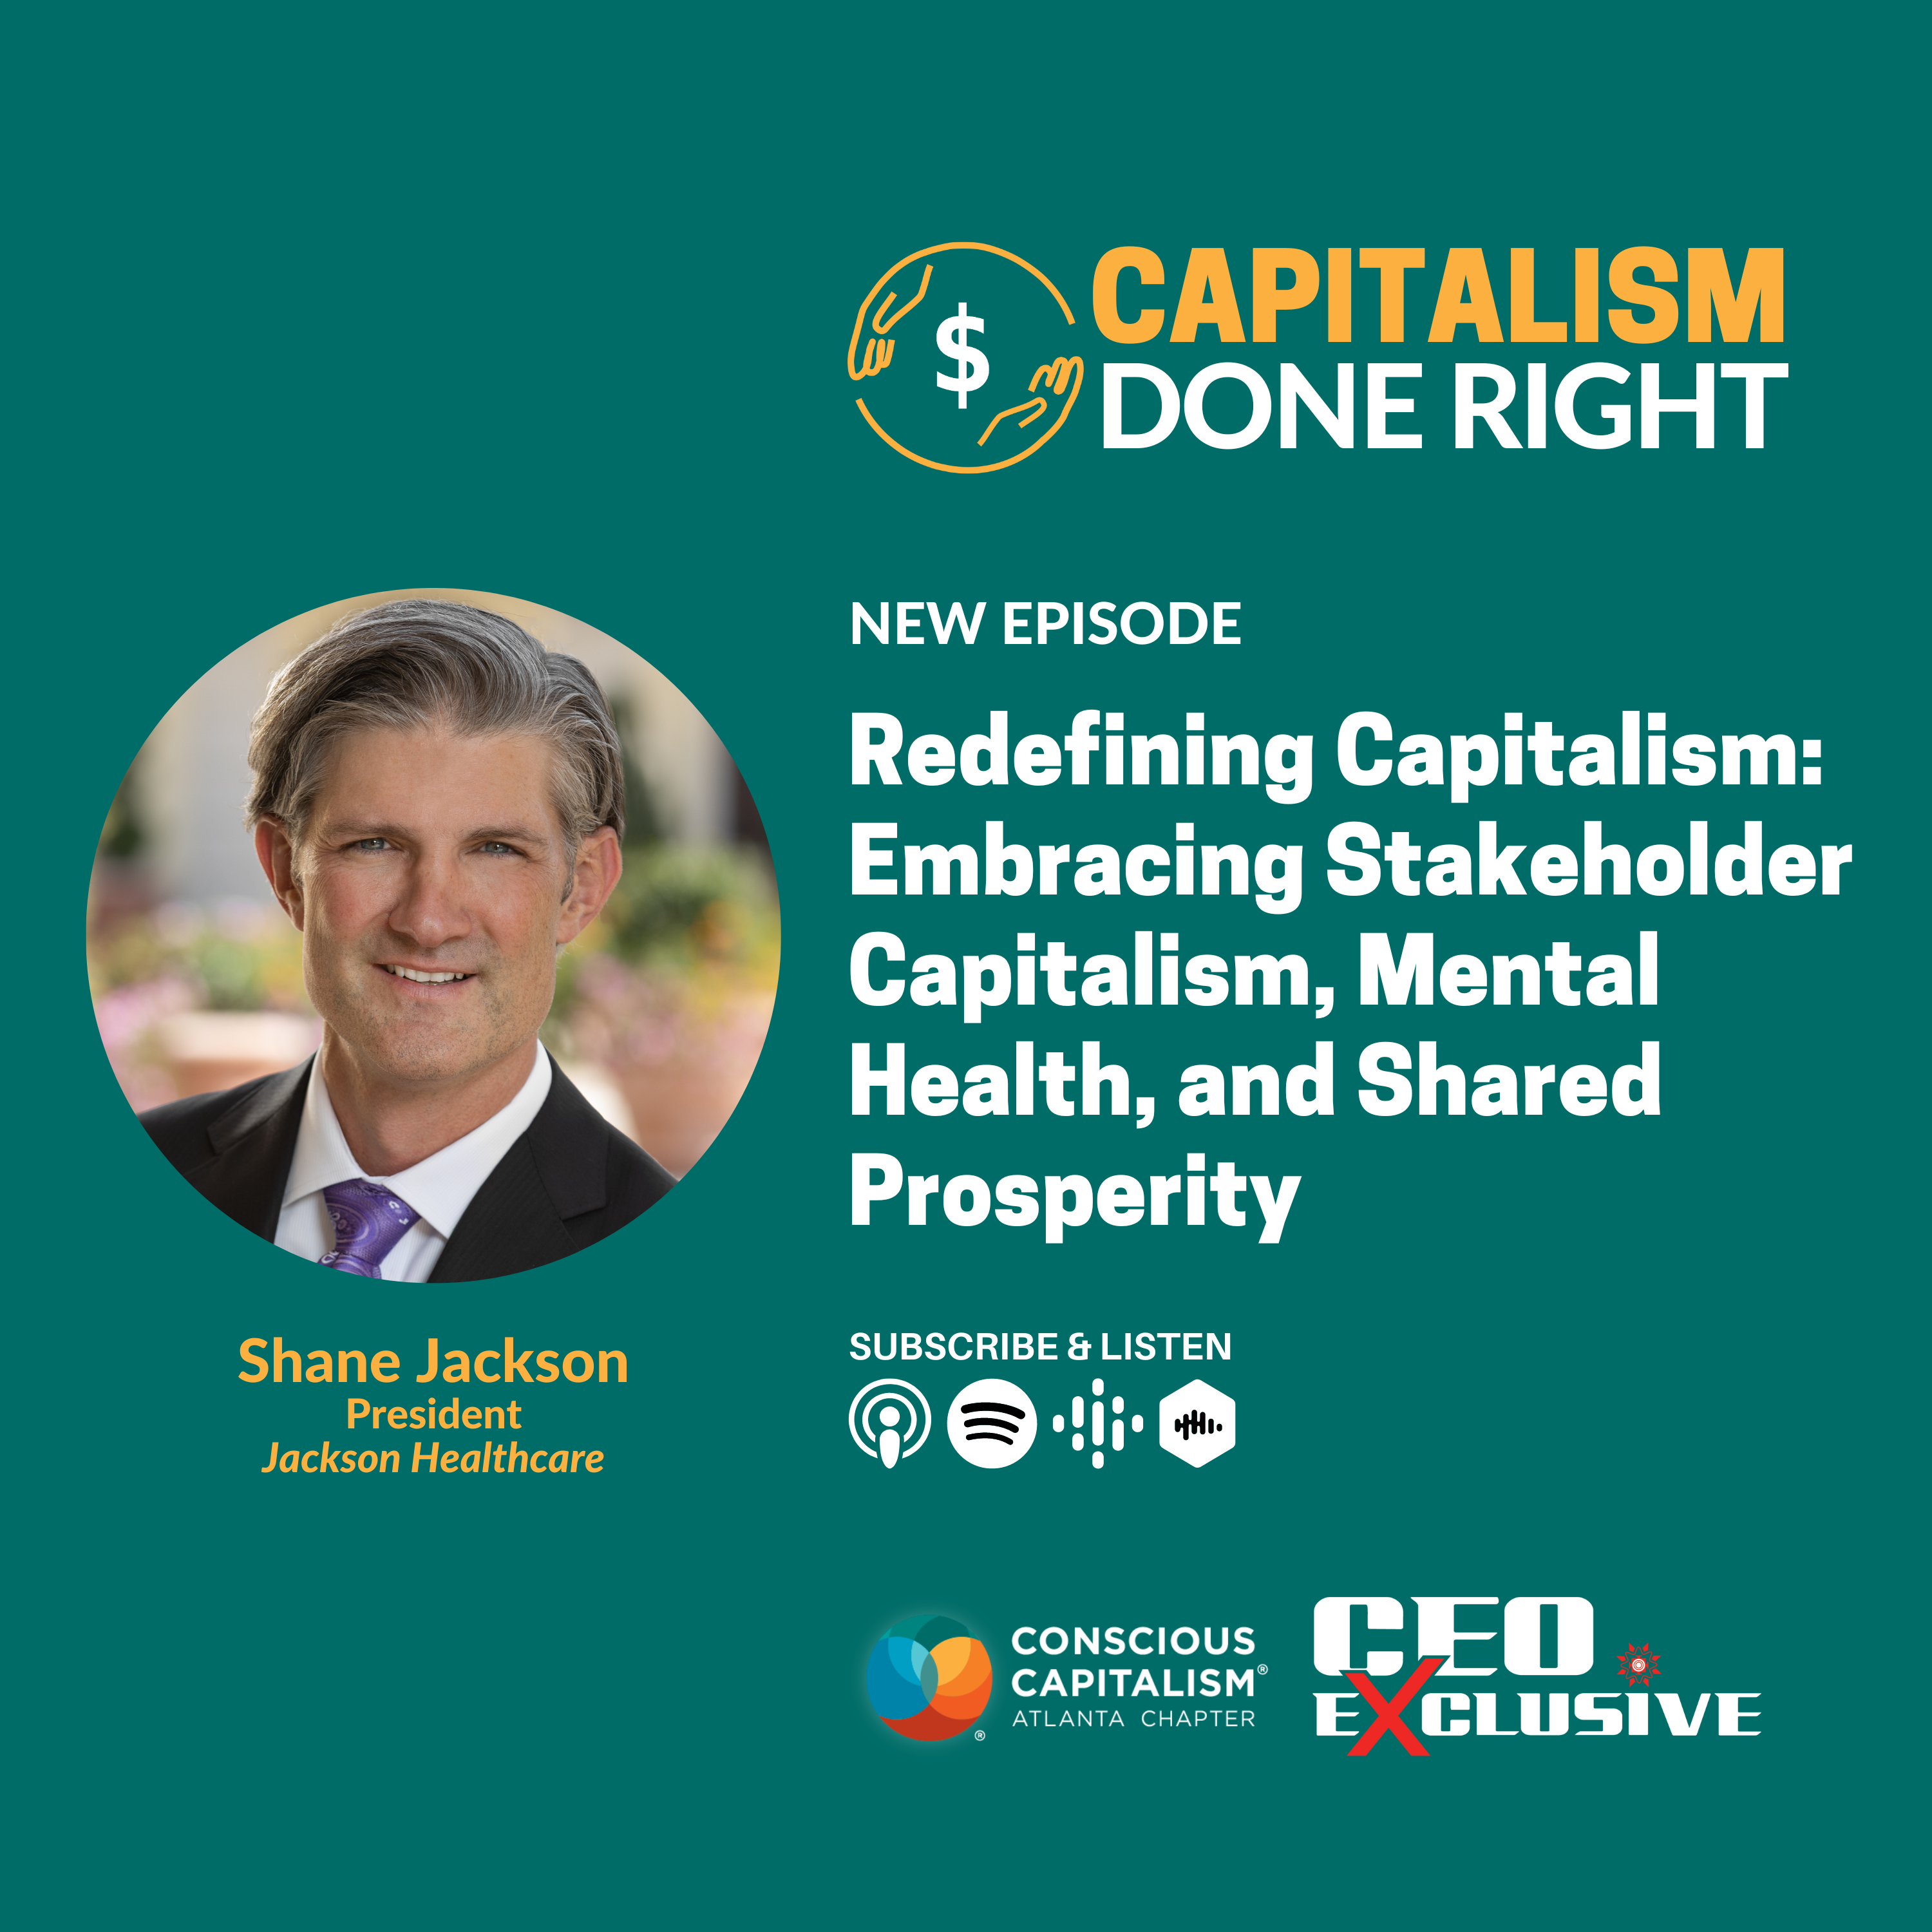 Redefining Capitalism: Embracing Stakeholder Capitalism, Mental Health, and Shared Prosperity with Shane Jackson